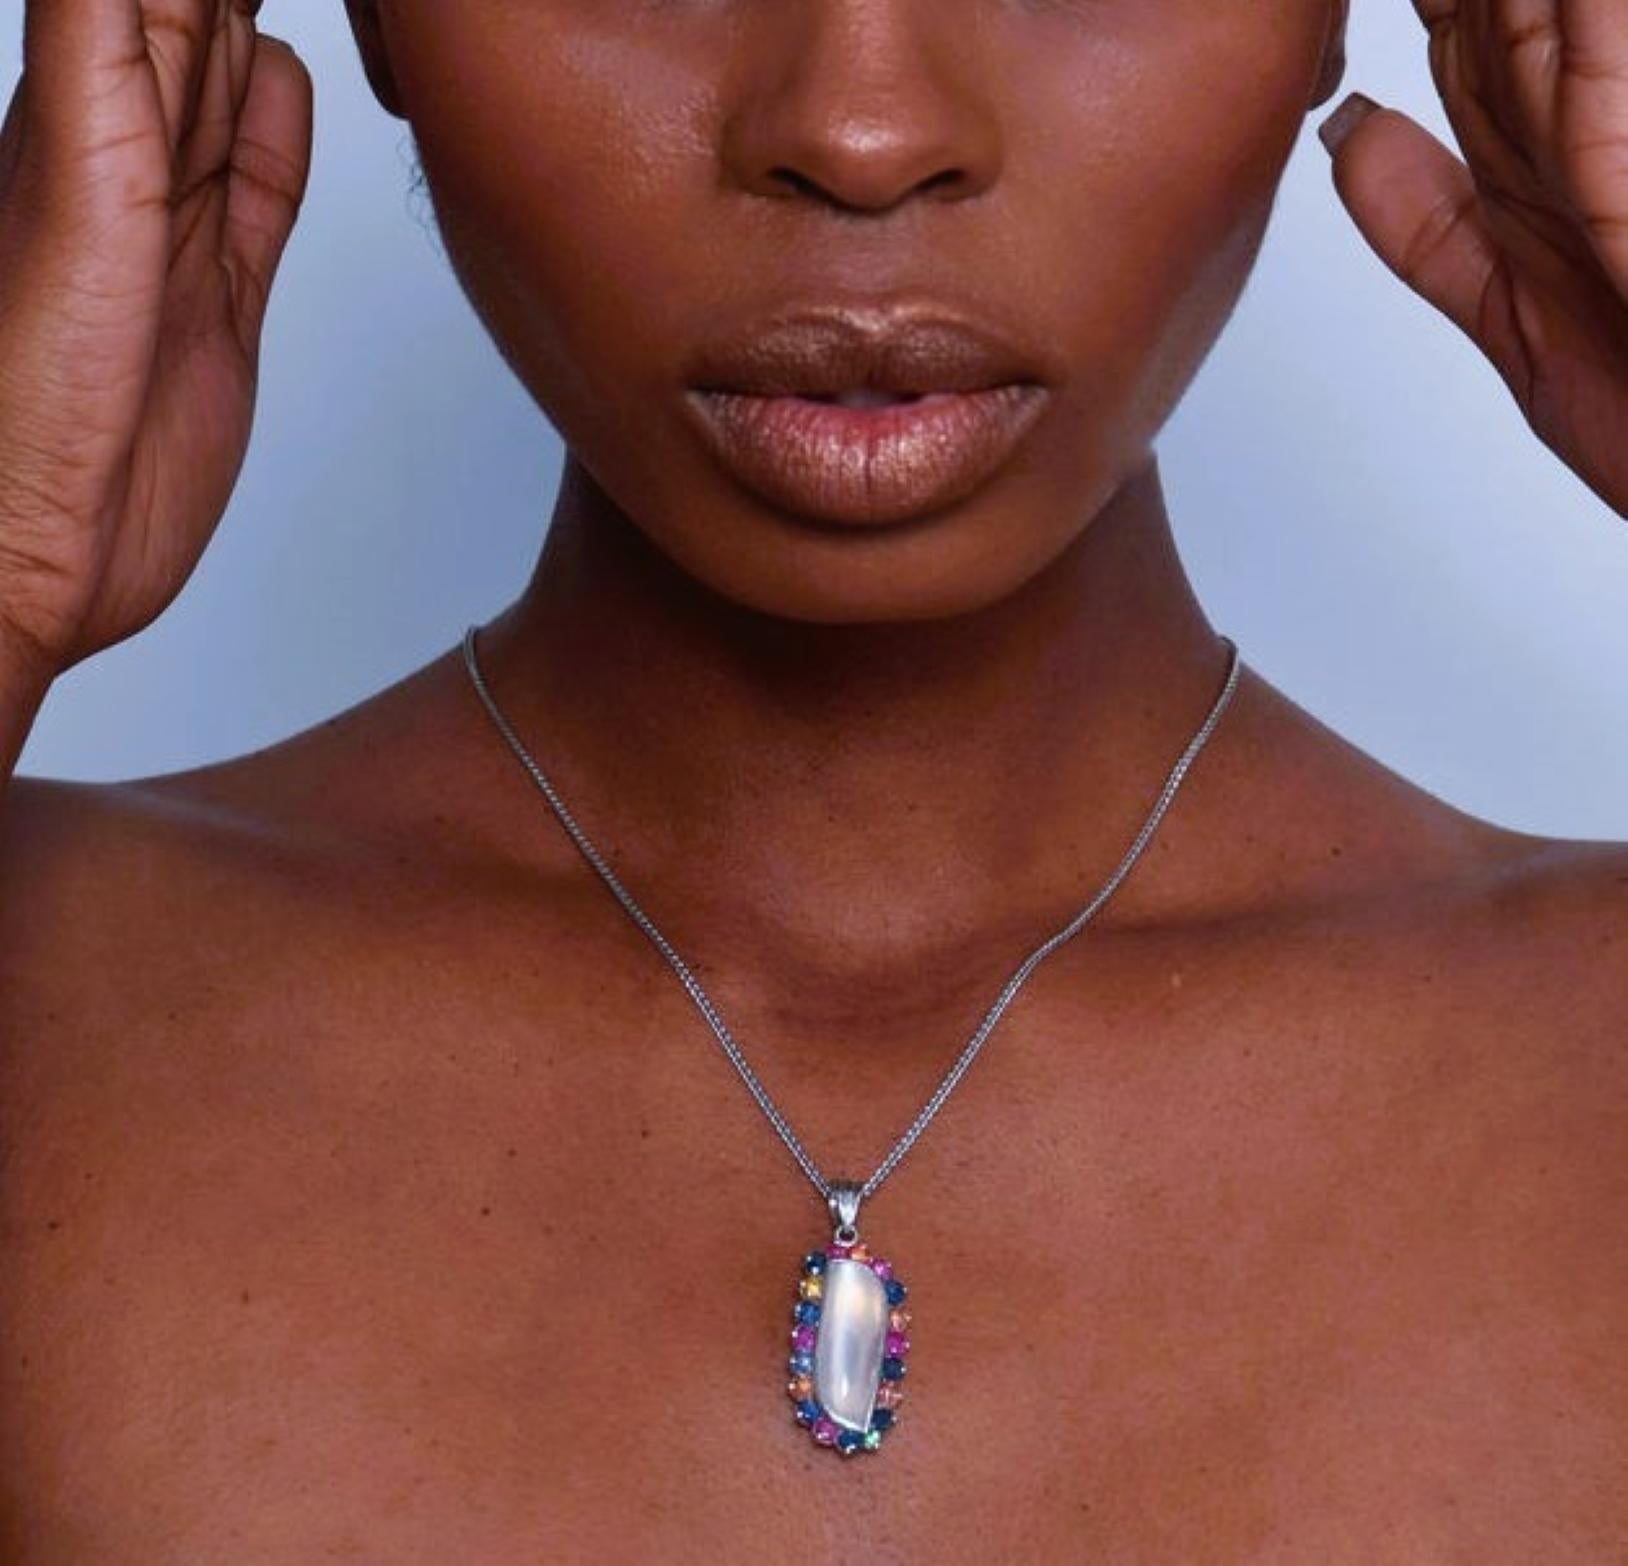 Our exquisite Pendant Necklace featuring a 6ct Oval Free-Form Natural Origin Moonstone—the focal point of a mesmerizing dance of colors. This wearable masterpiece is surrounded by a symphony of gemstones.

Key Features:
Oval Free-Form Moonstone: 6ct